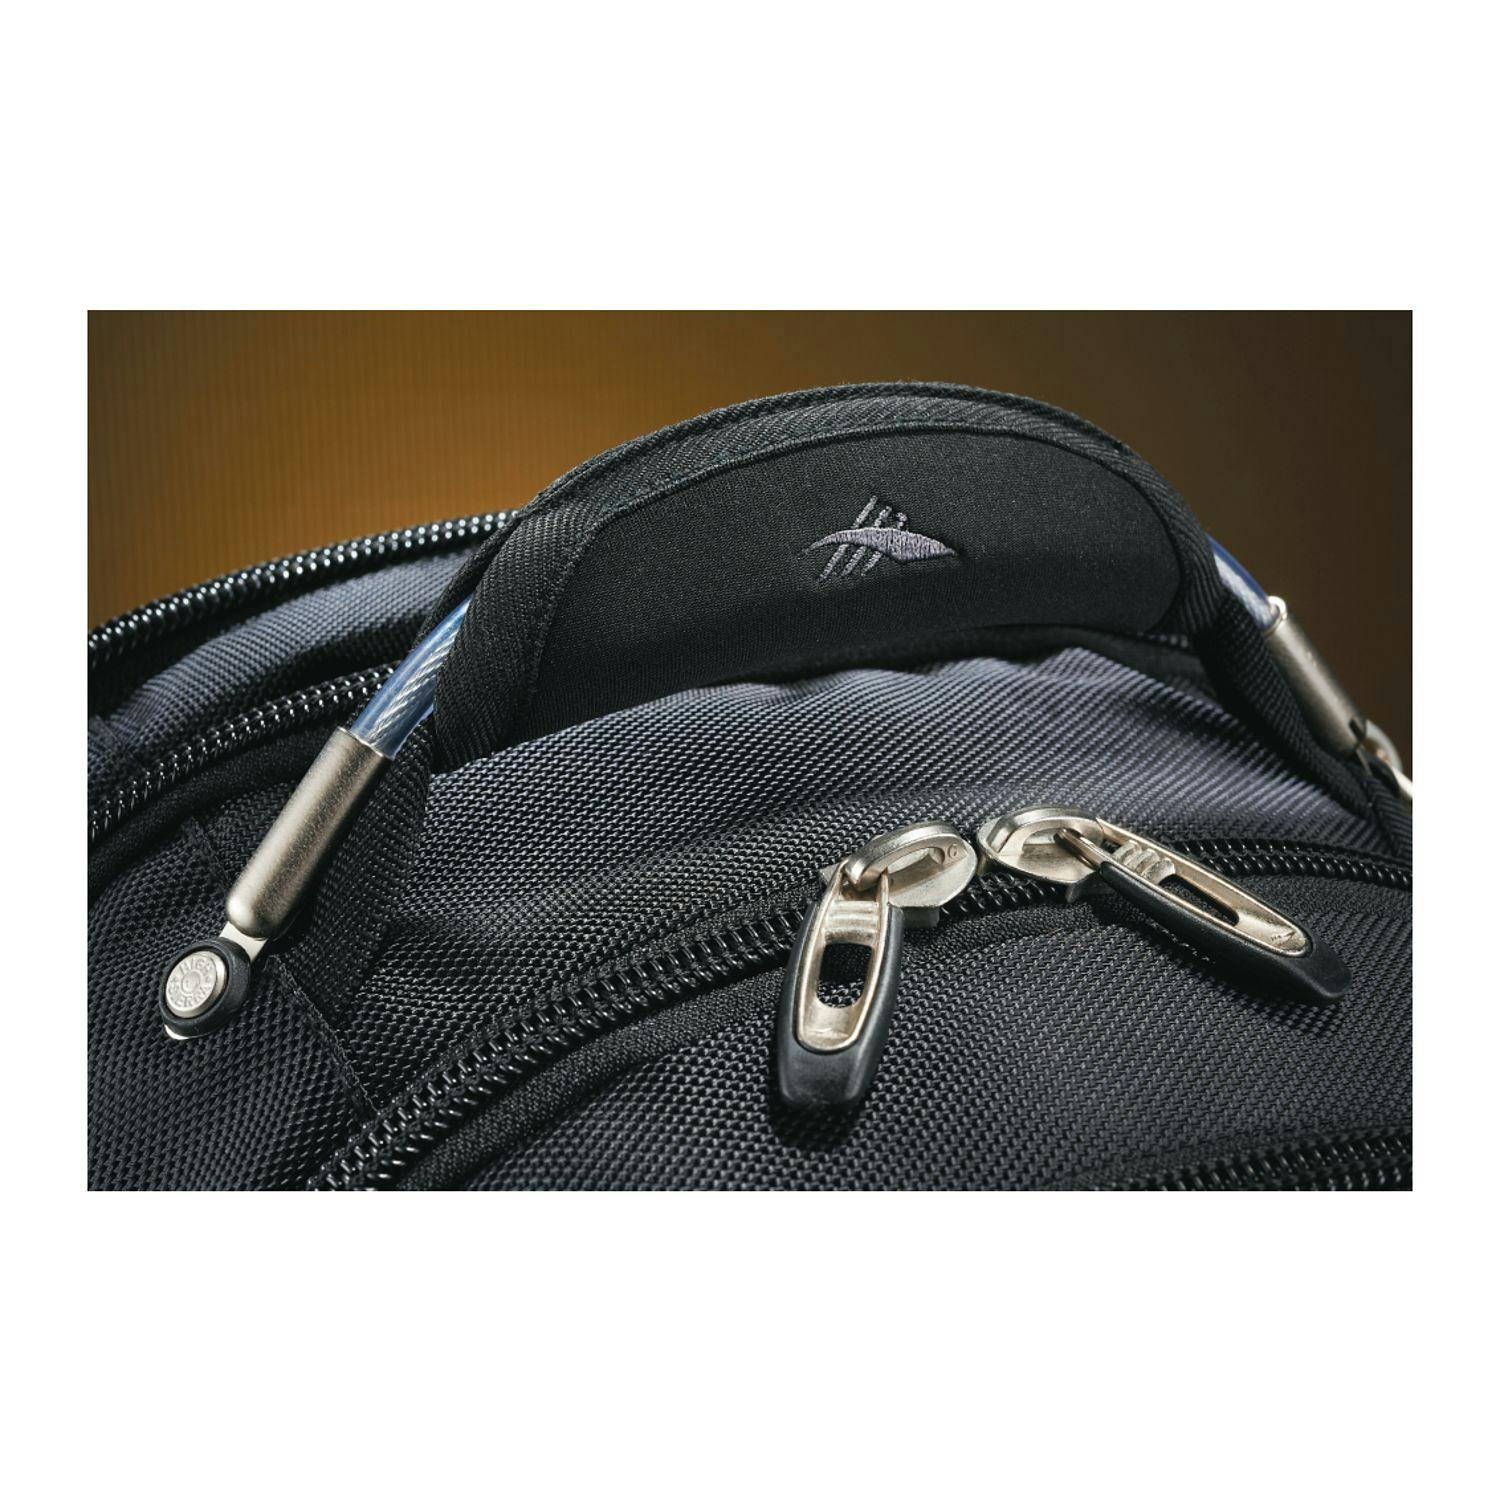 High Sierra Elite Fly-By 17" Computer Backpack - additional Image 6